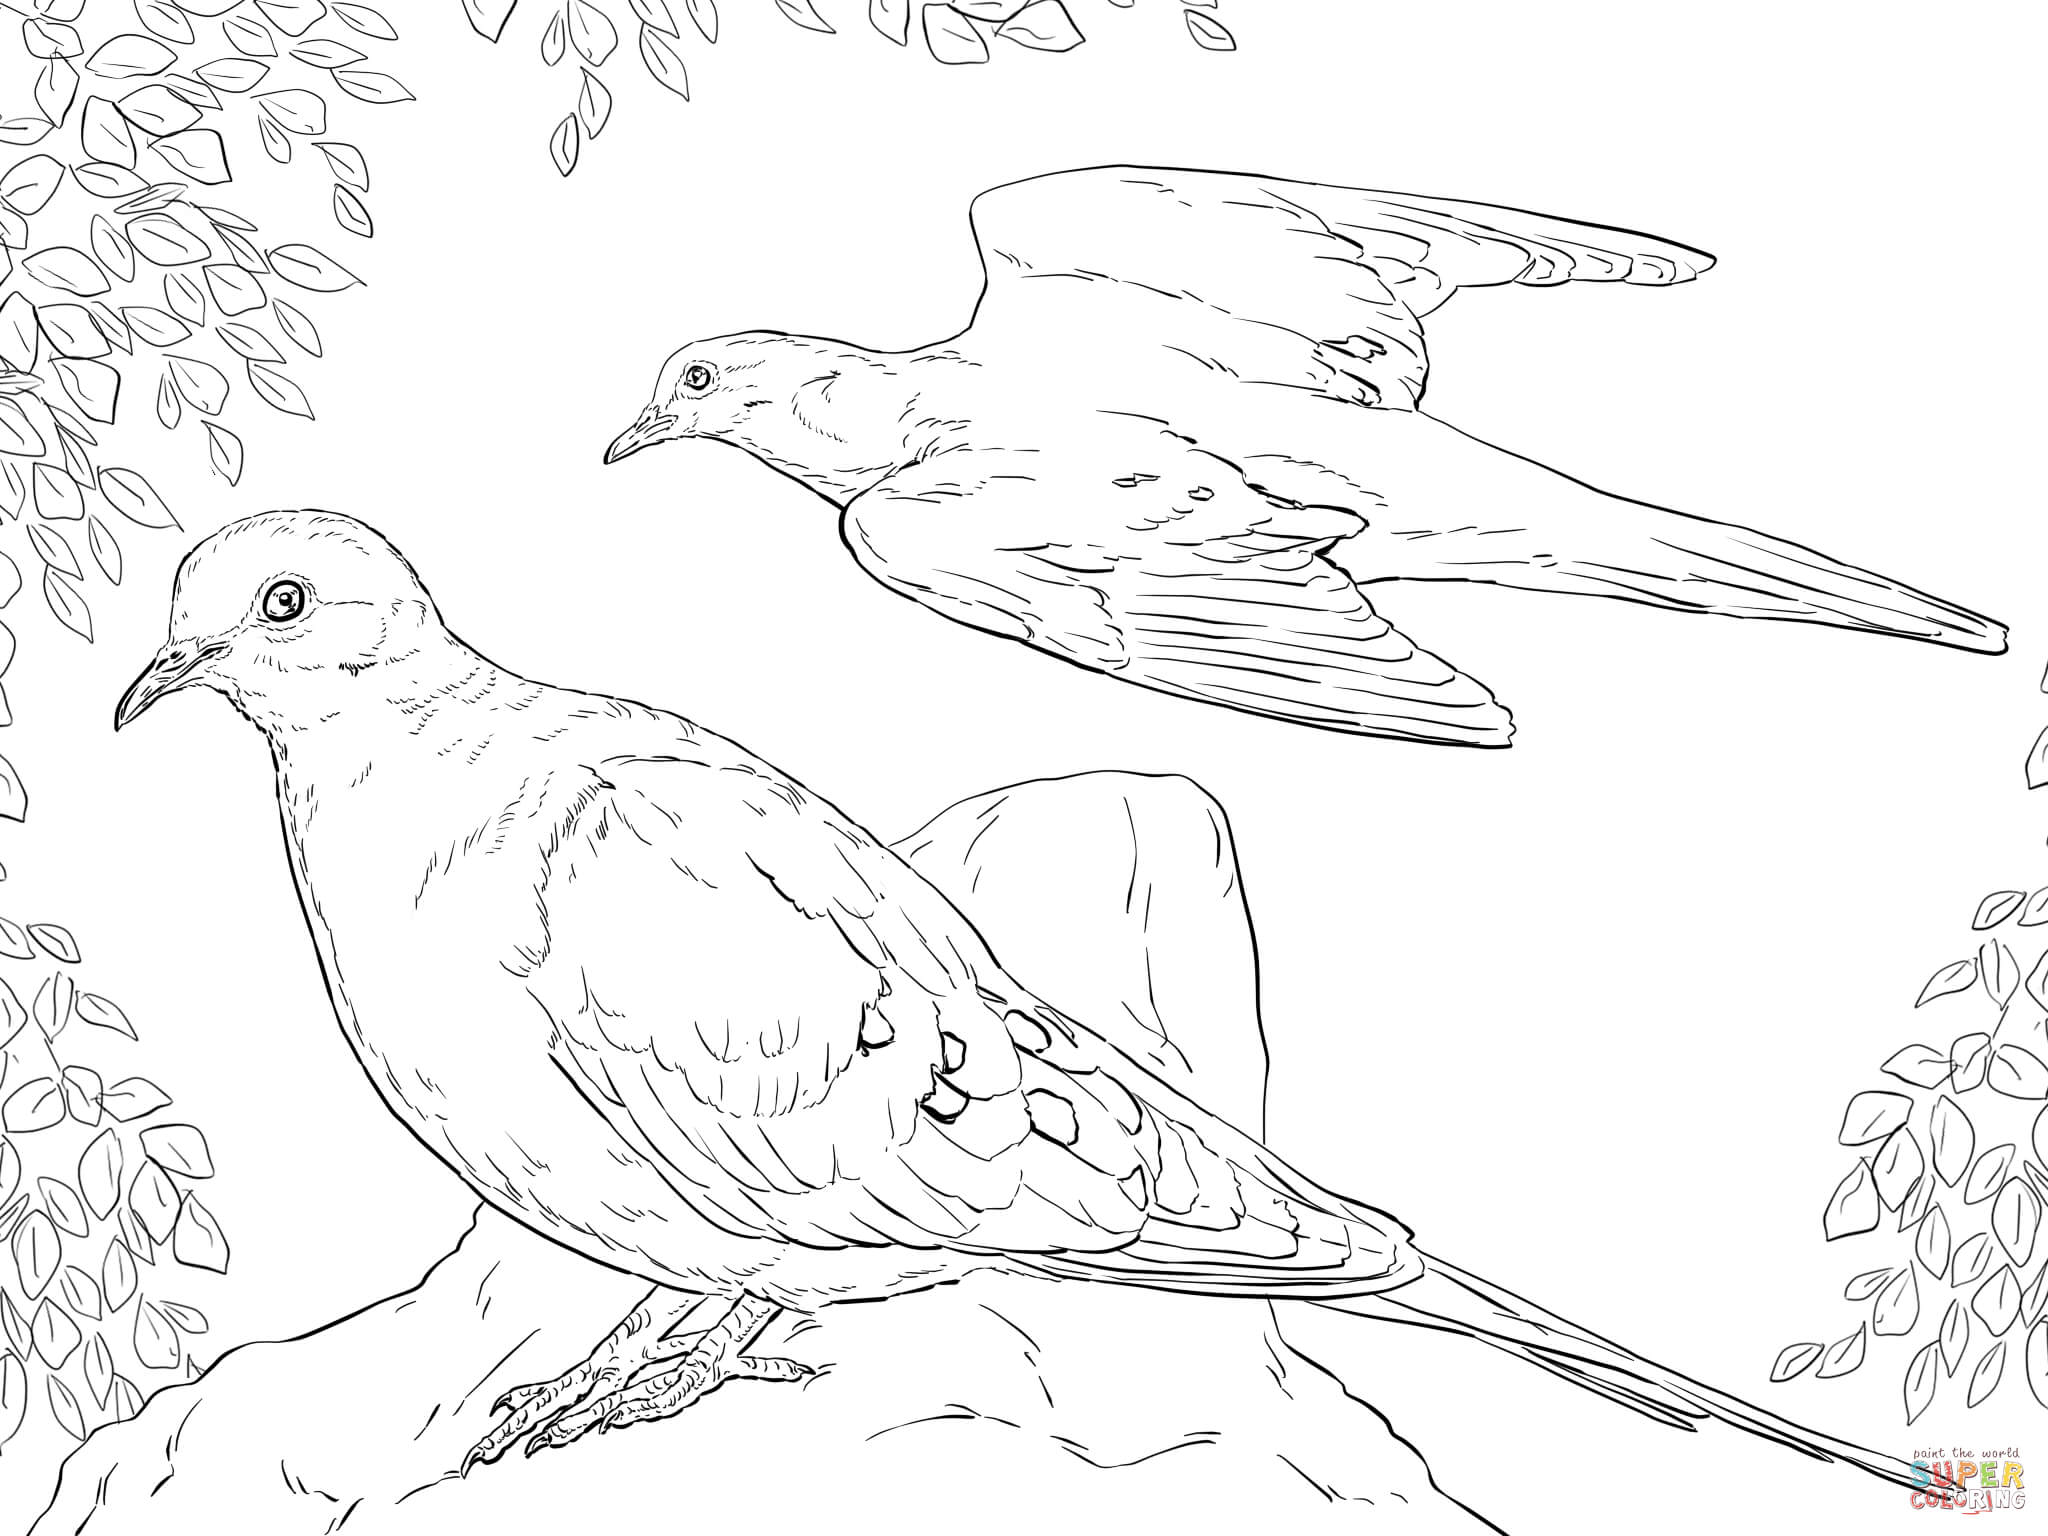 Two Mourning Doves coloring page | Free Printable Coloring Pages